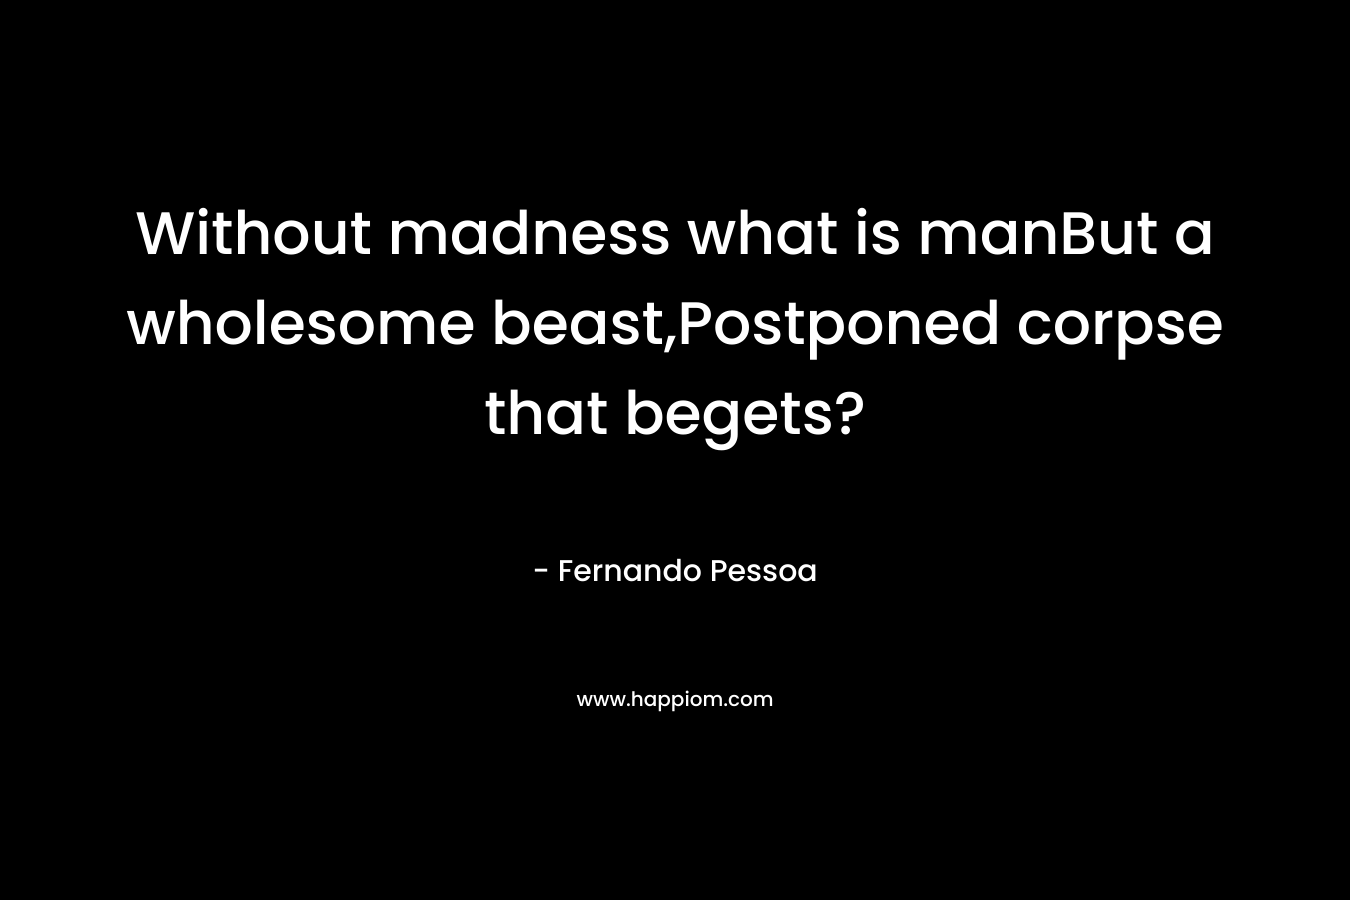 Without madness what is manBut a wholesome beast,Postponed corpse that begets?